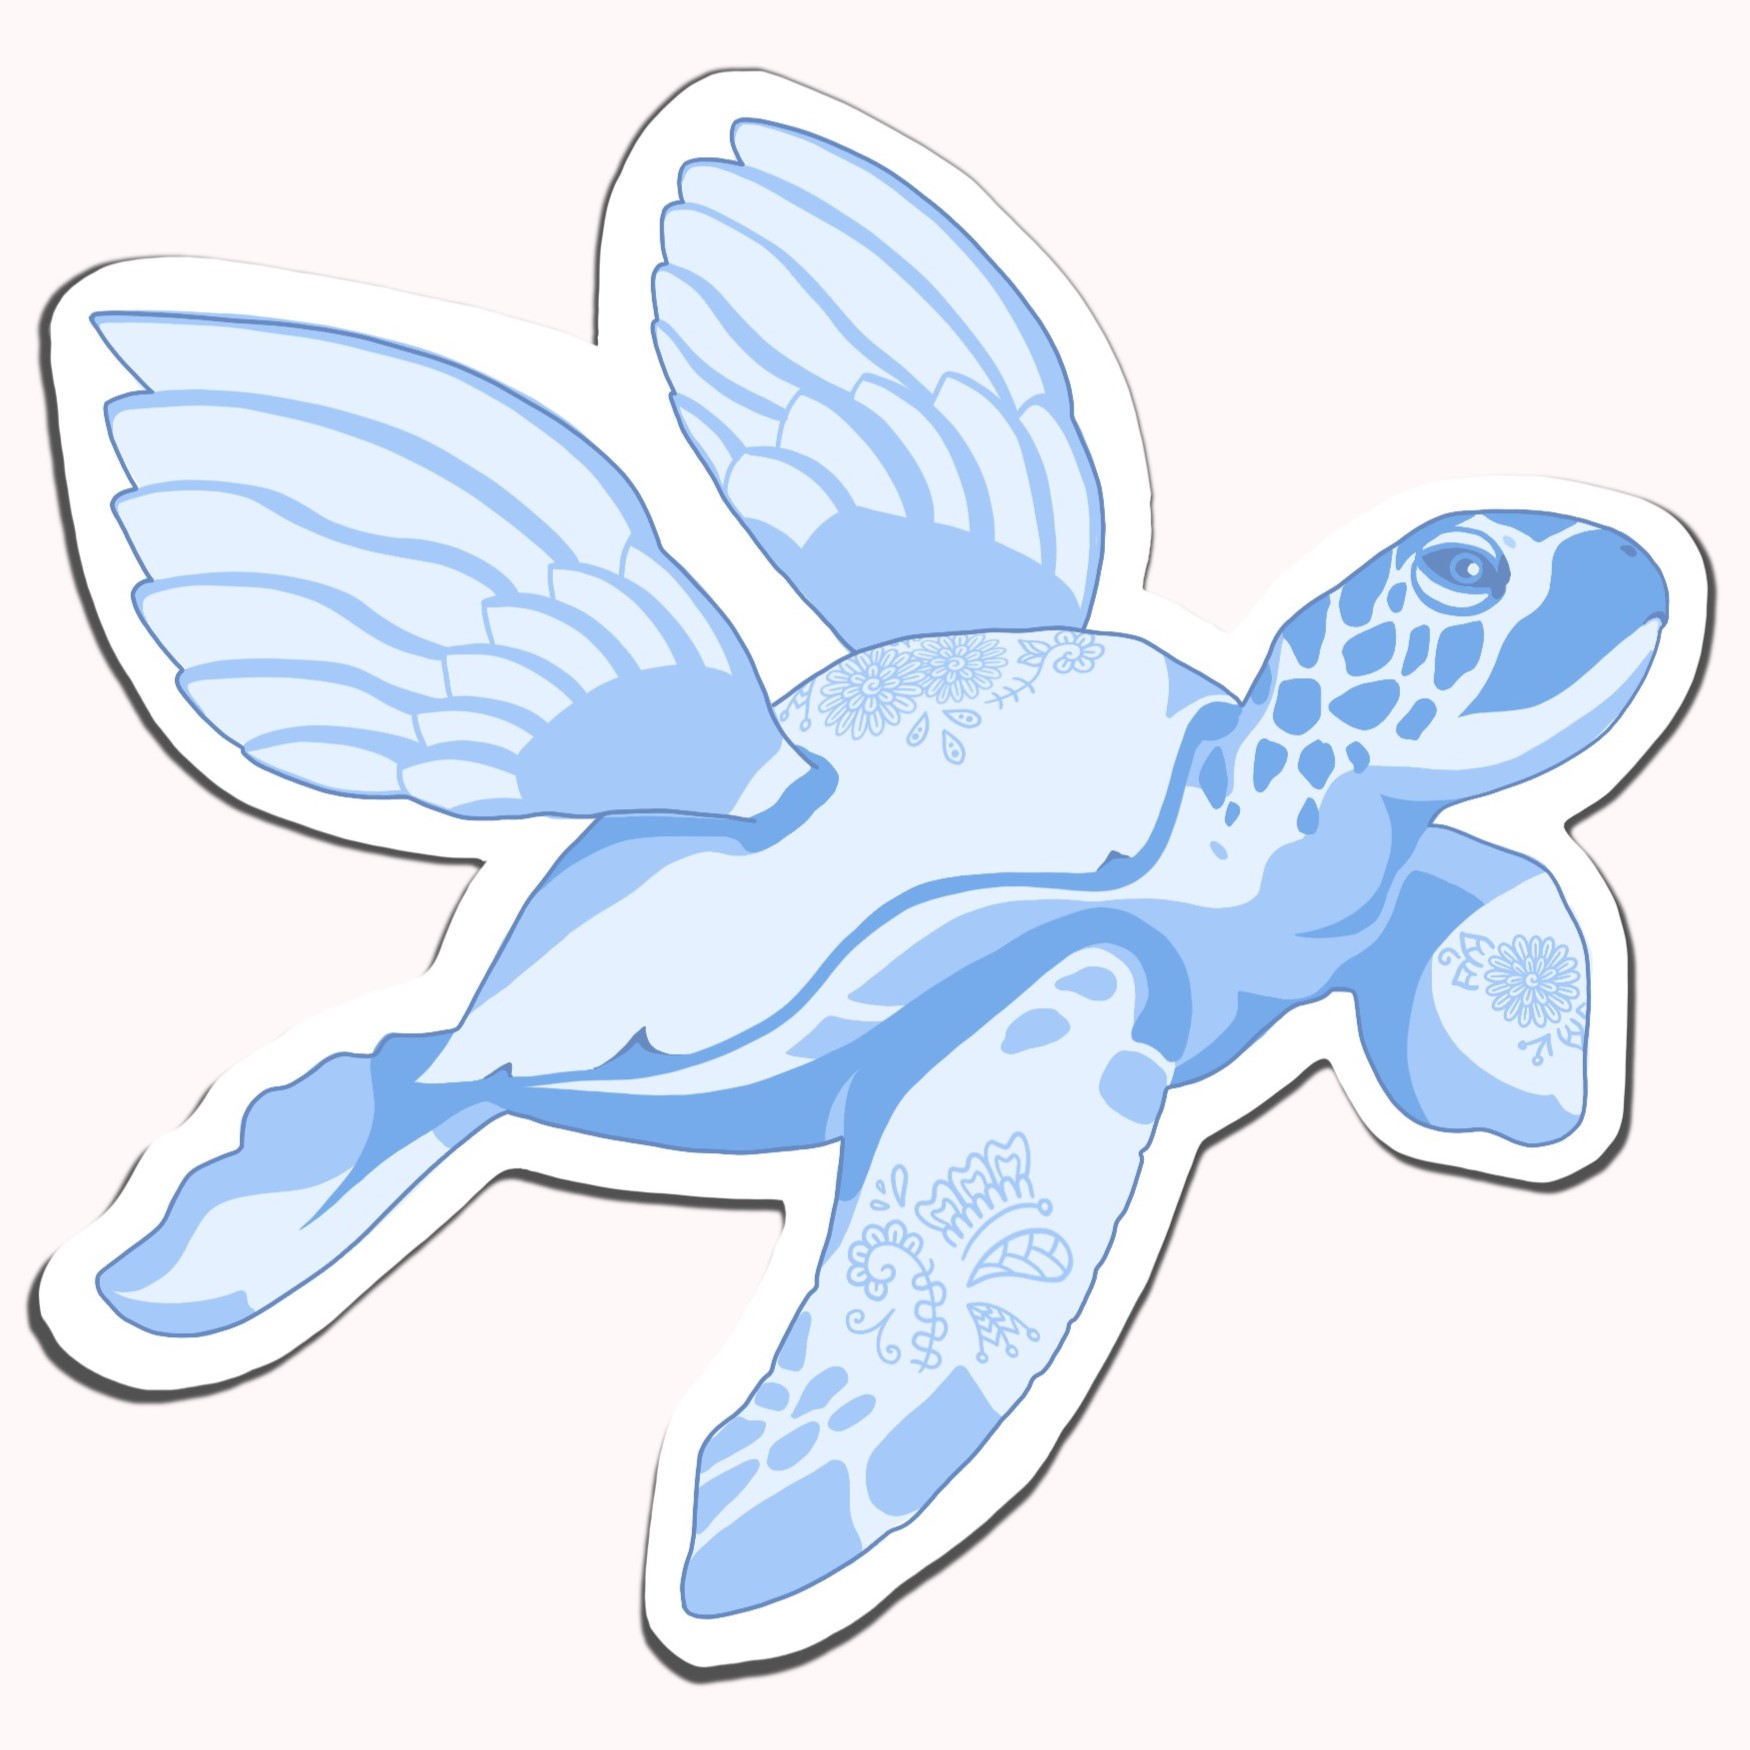 Winged Turtle sticker design. Shows floating sea turtle with wings in a light blue monochromatic color palette.